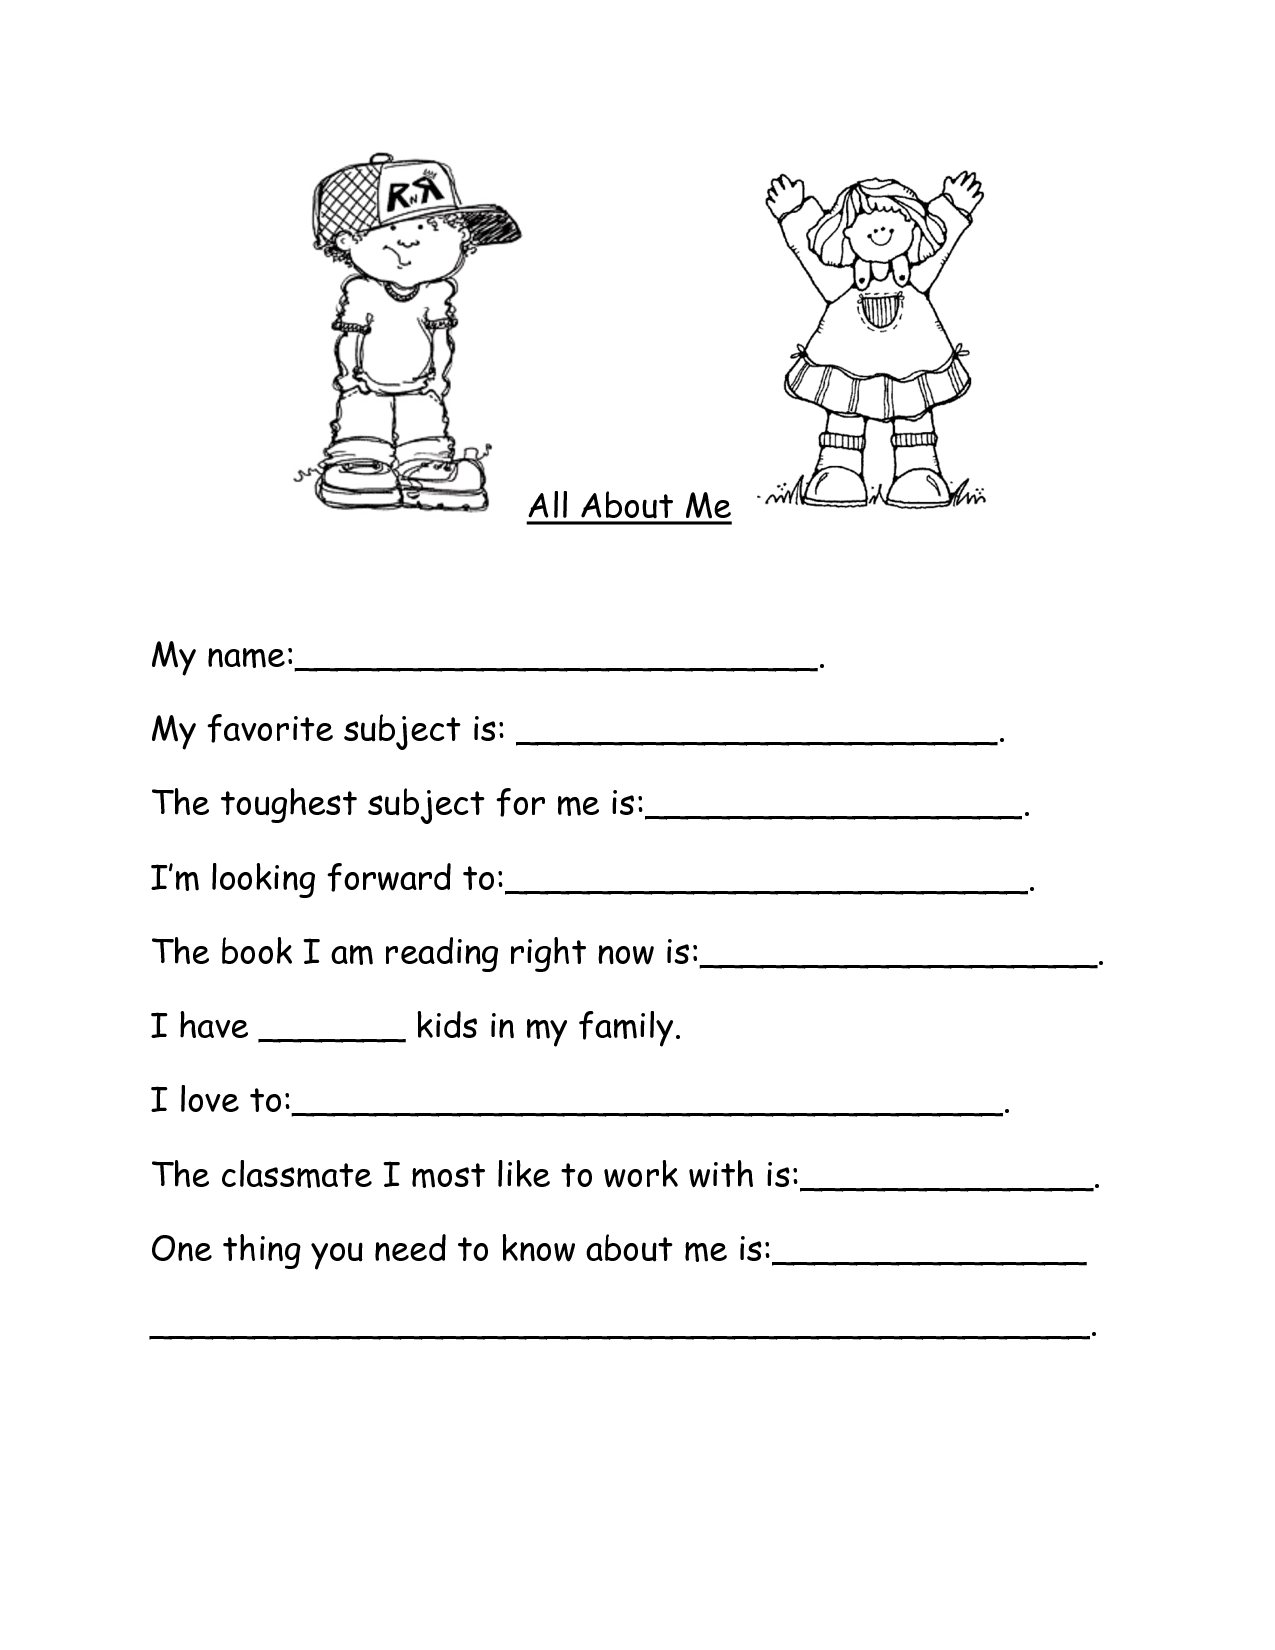 All About Me Template Worksheet